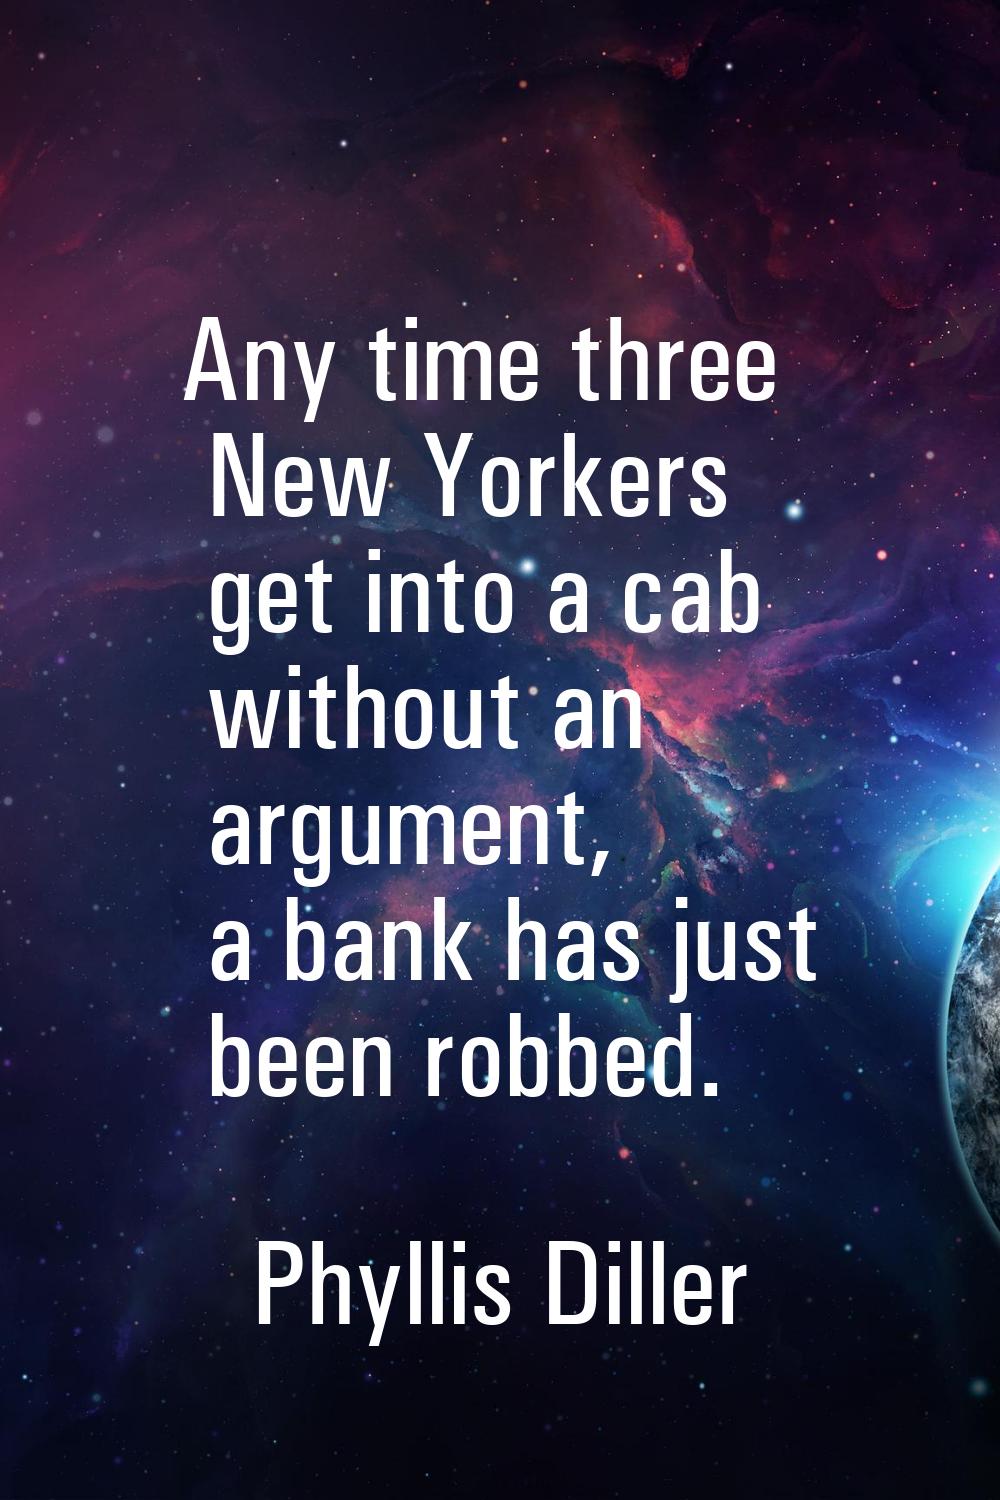 Any time three New Yorkers get into a cab without an argument, a bank has just been robbed.